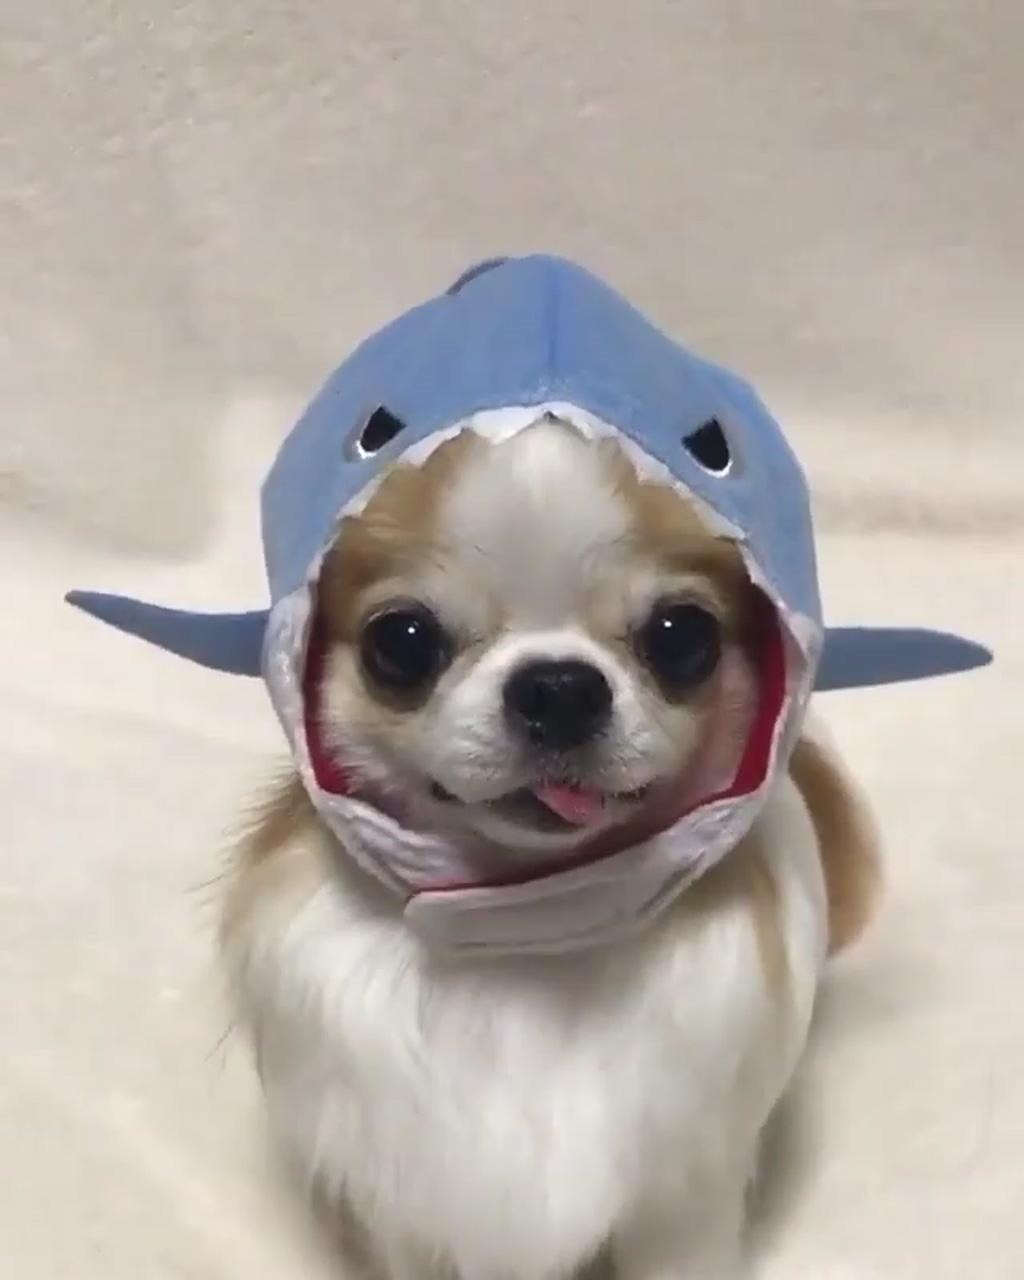 Chihuahua shark costume | "adorable canine companions: exploring the world of cute dogs"